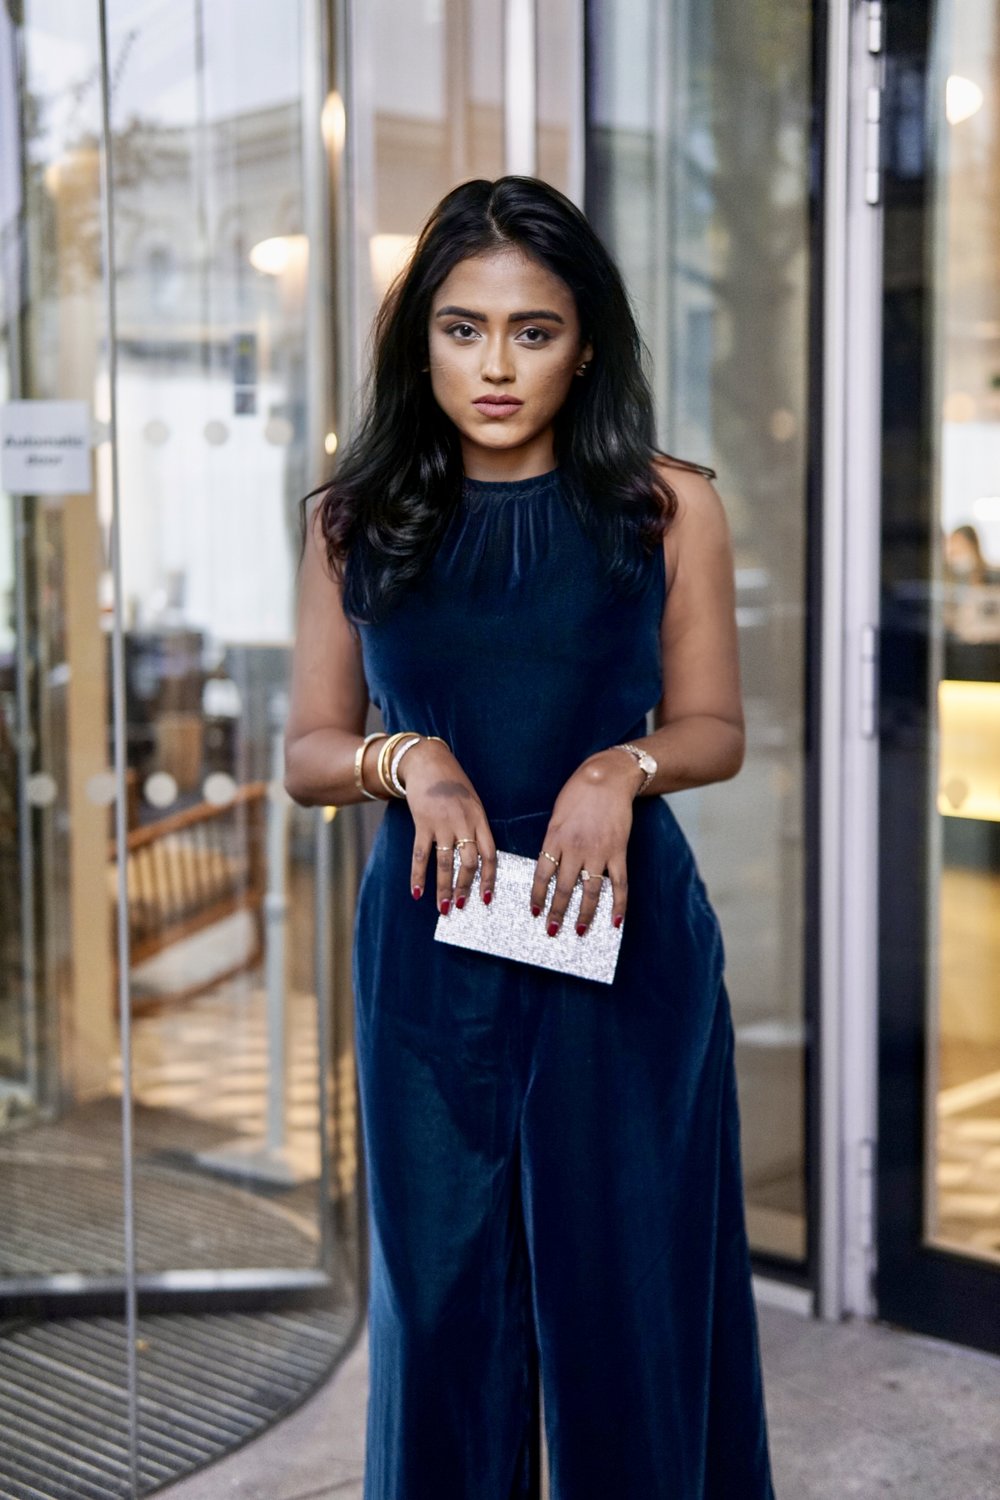 Sachini standing in front of a glass window wearing a navy colour Albaray dress holding a small silver handbag